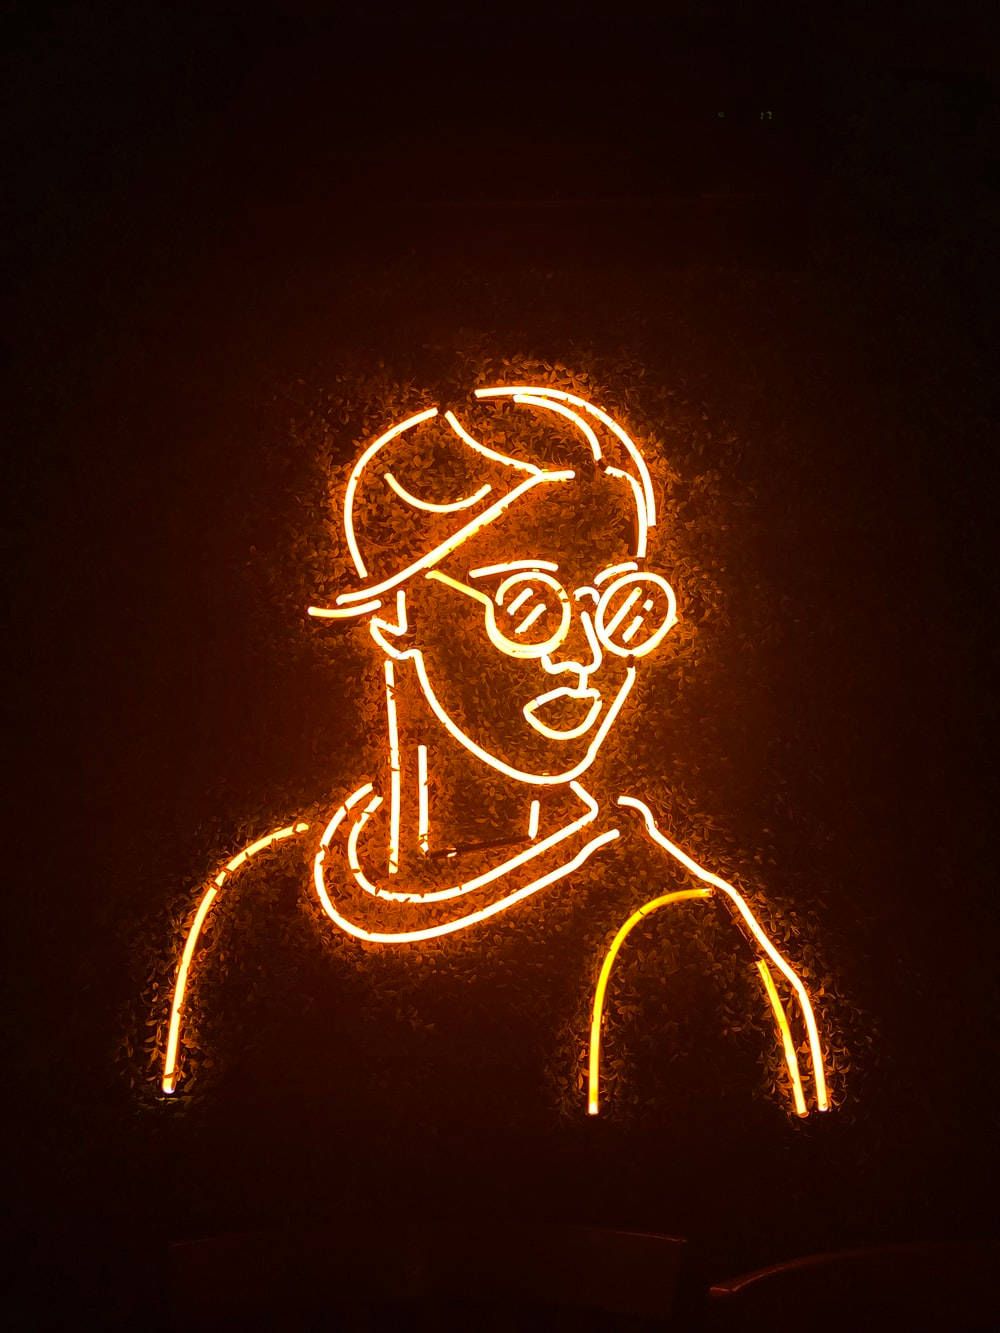 A neon sign of a man with glasses - Dark orange